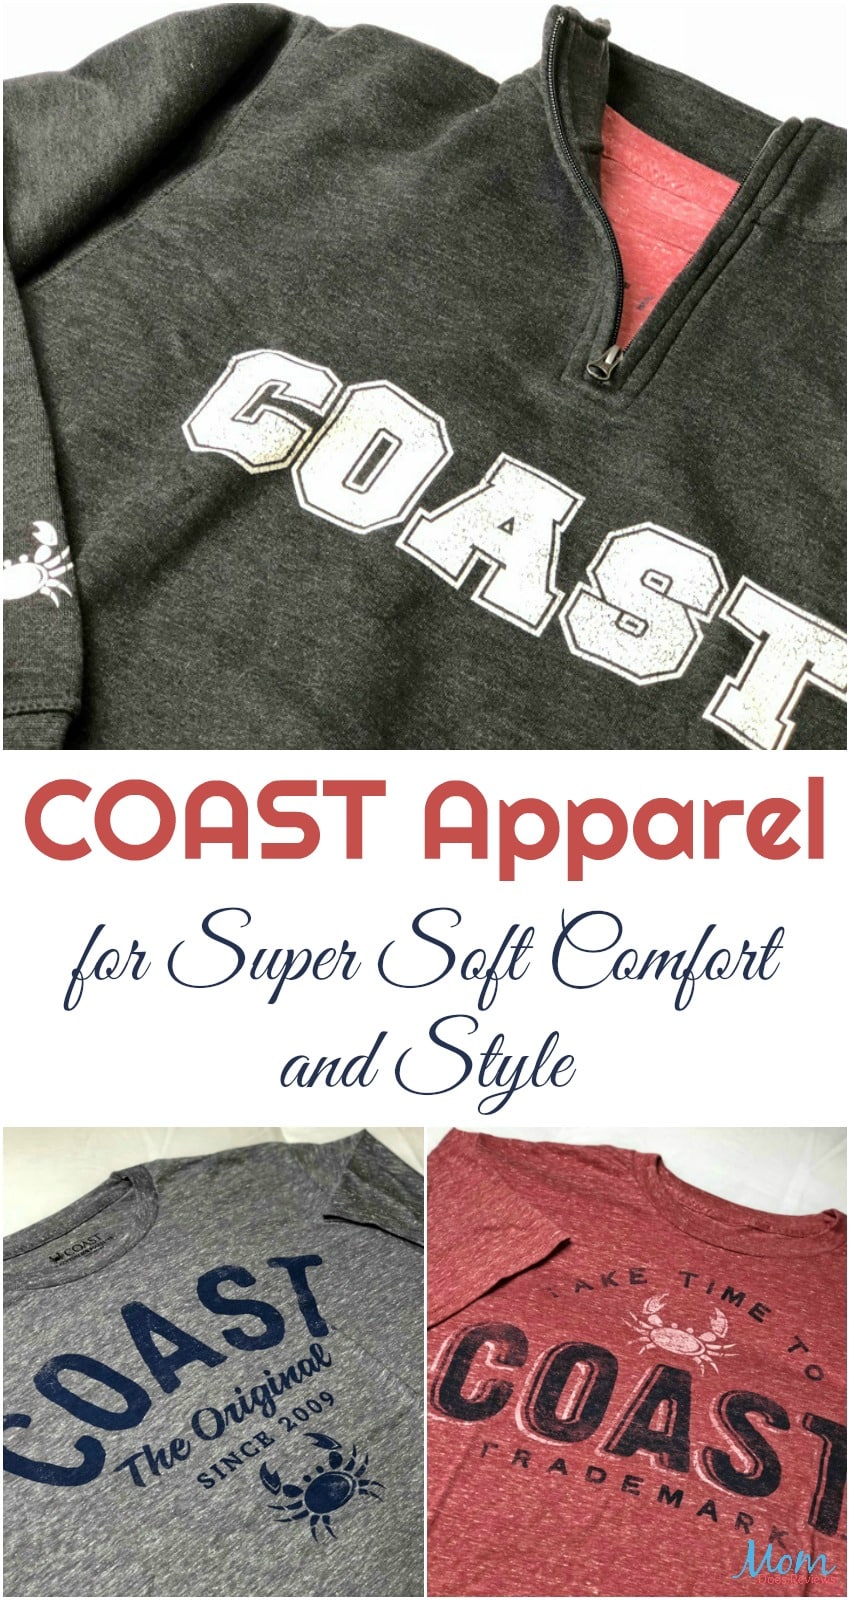 COAST Apparel for Super Soft Comfort and Style 